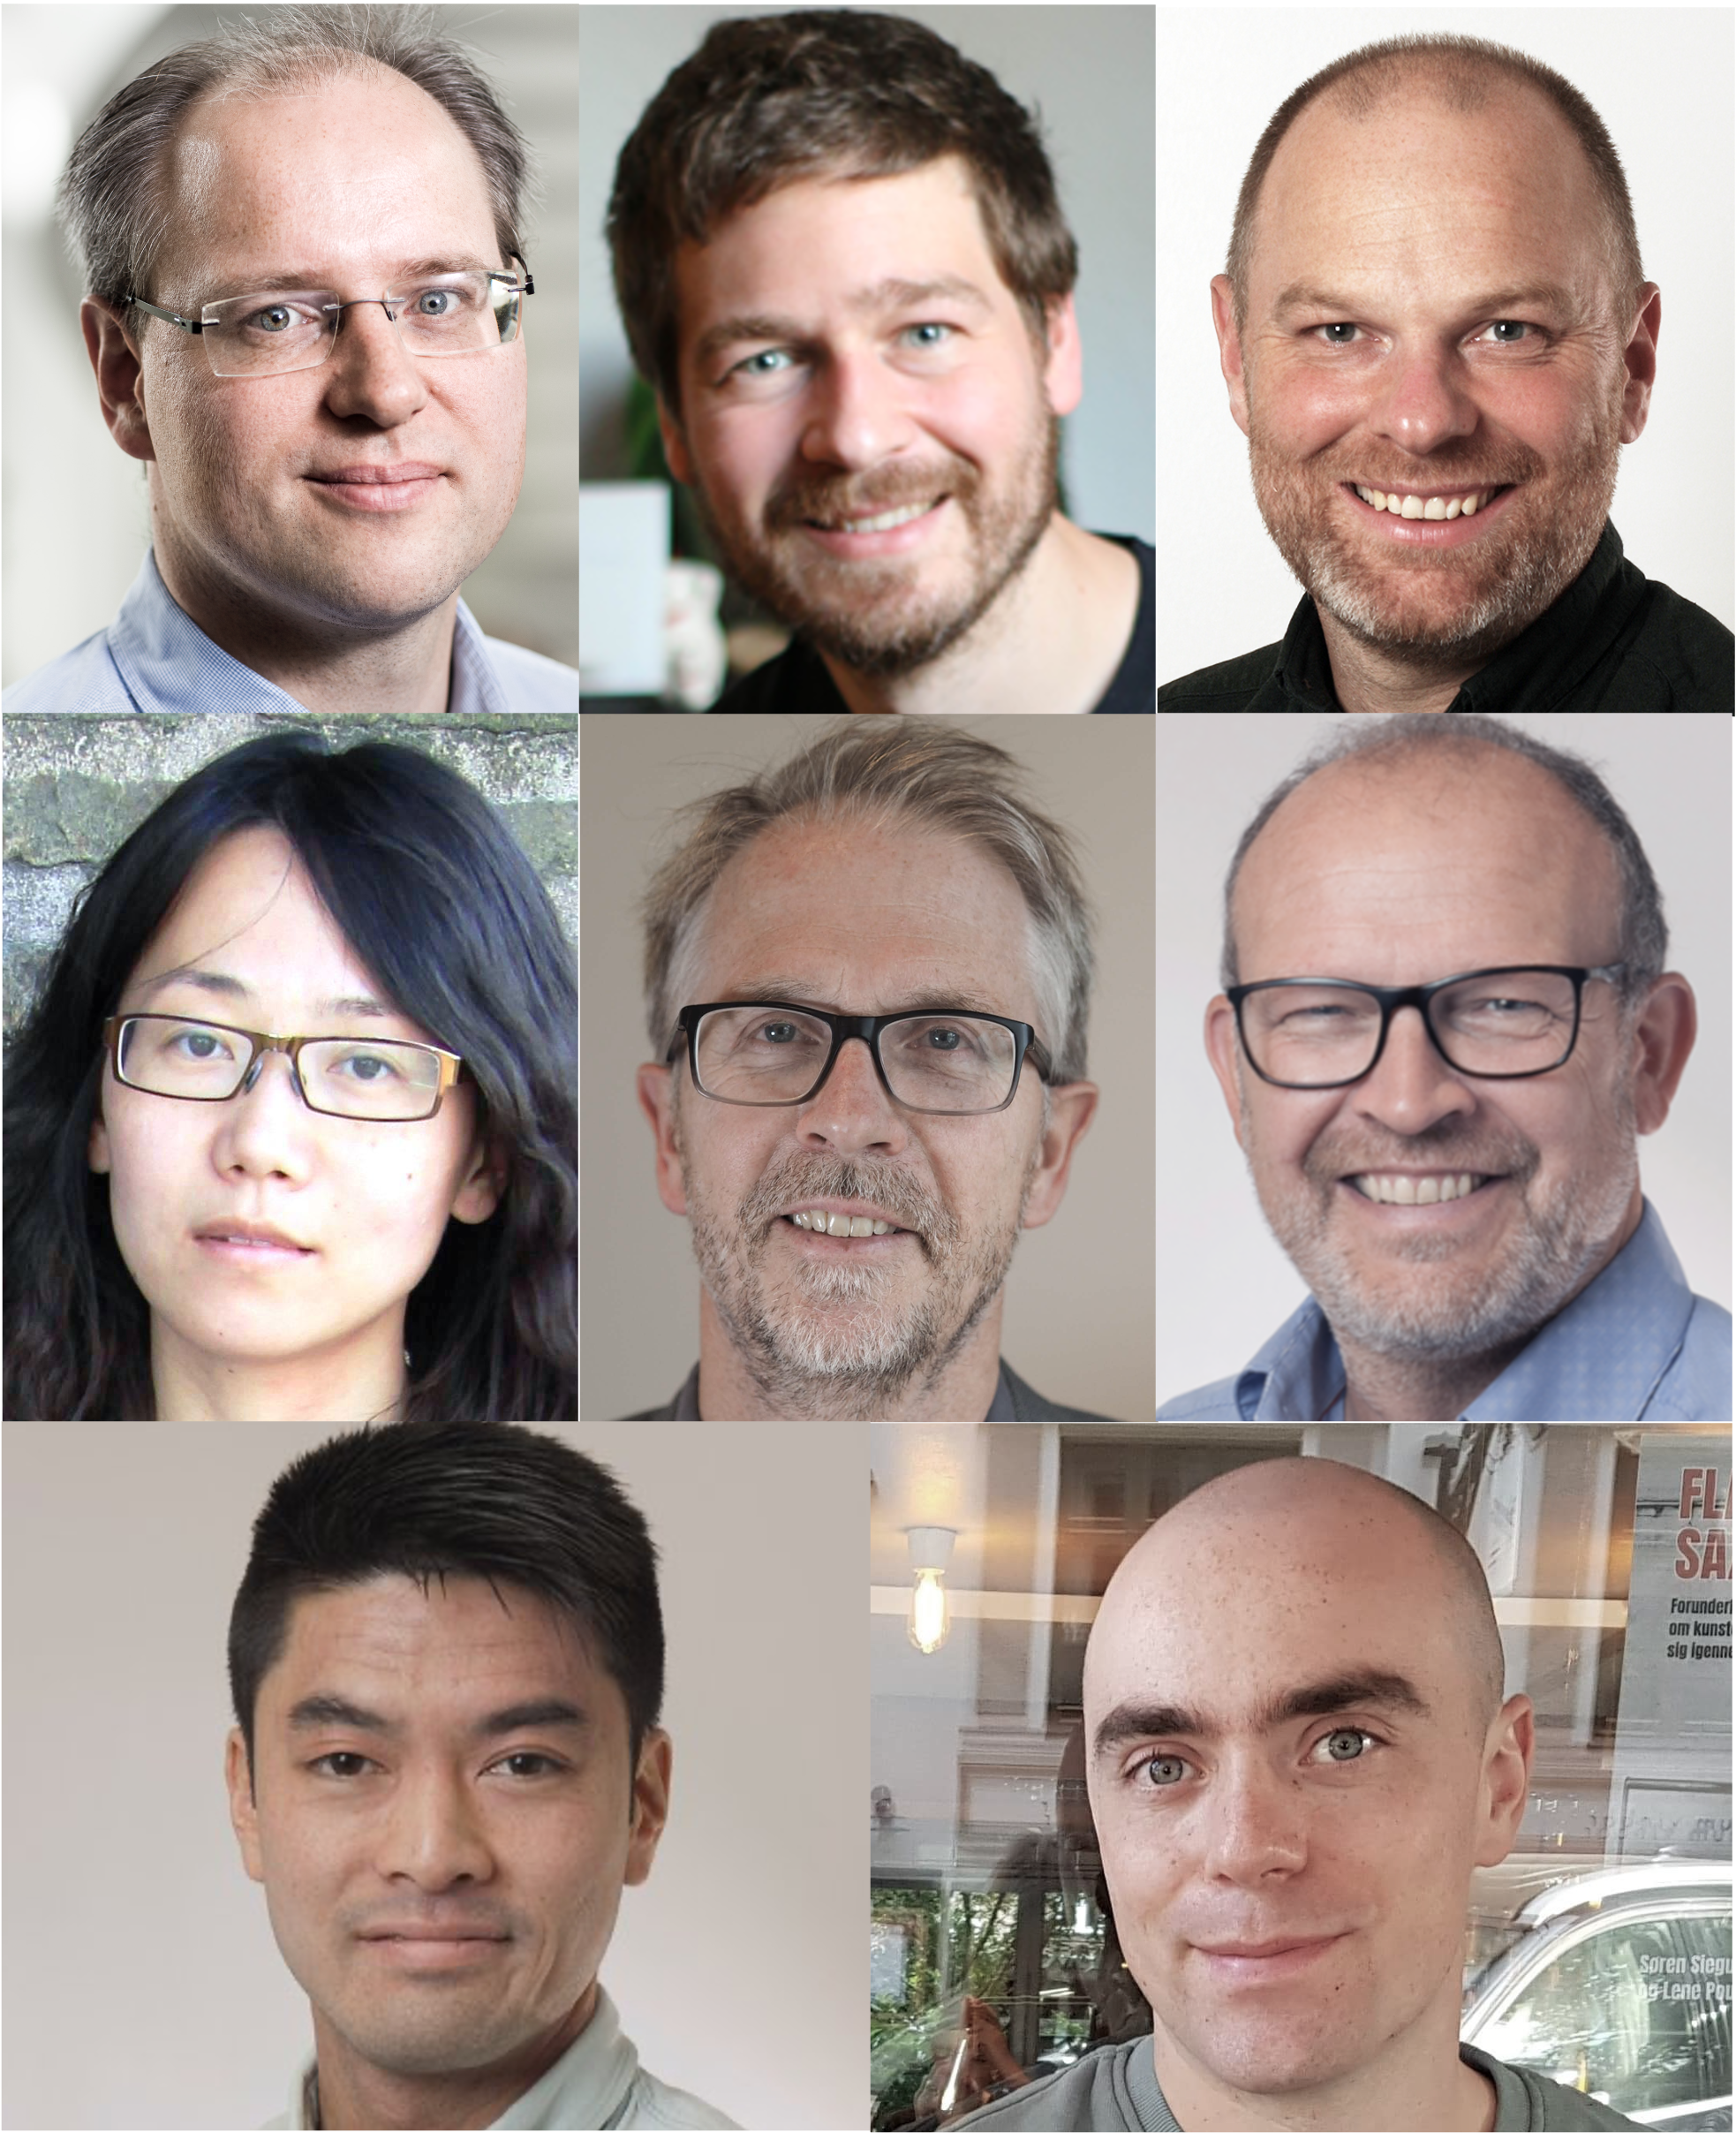 Henrik Birkedal, Julián Valero Moreno, Menglin Chen, Jørgen Kjems, Magnus Kjærgaard, Poul Nissen, Michael Truong-Giang Nguyen, and Nikolaj Roth could all go on Christmas holidays with the good news that they had received one or more research grants. Photo: Aarhus University